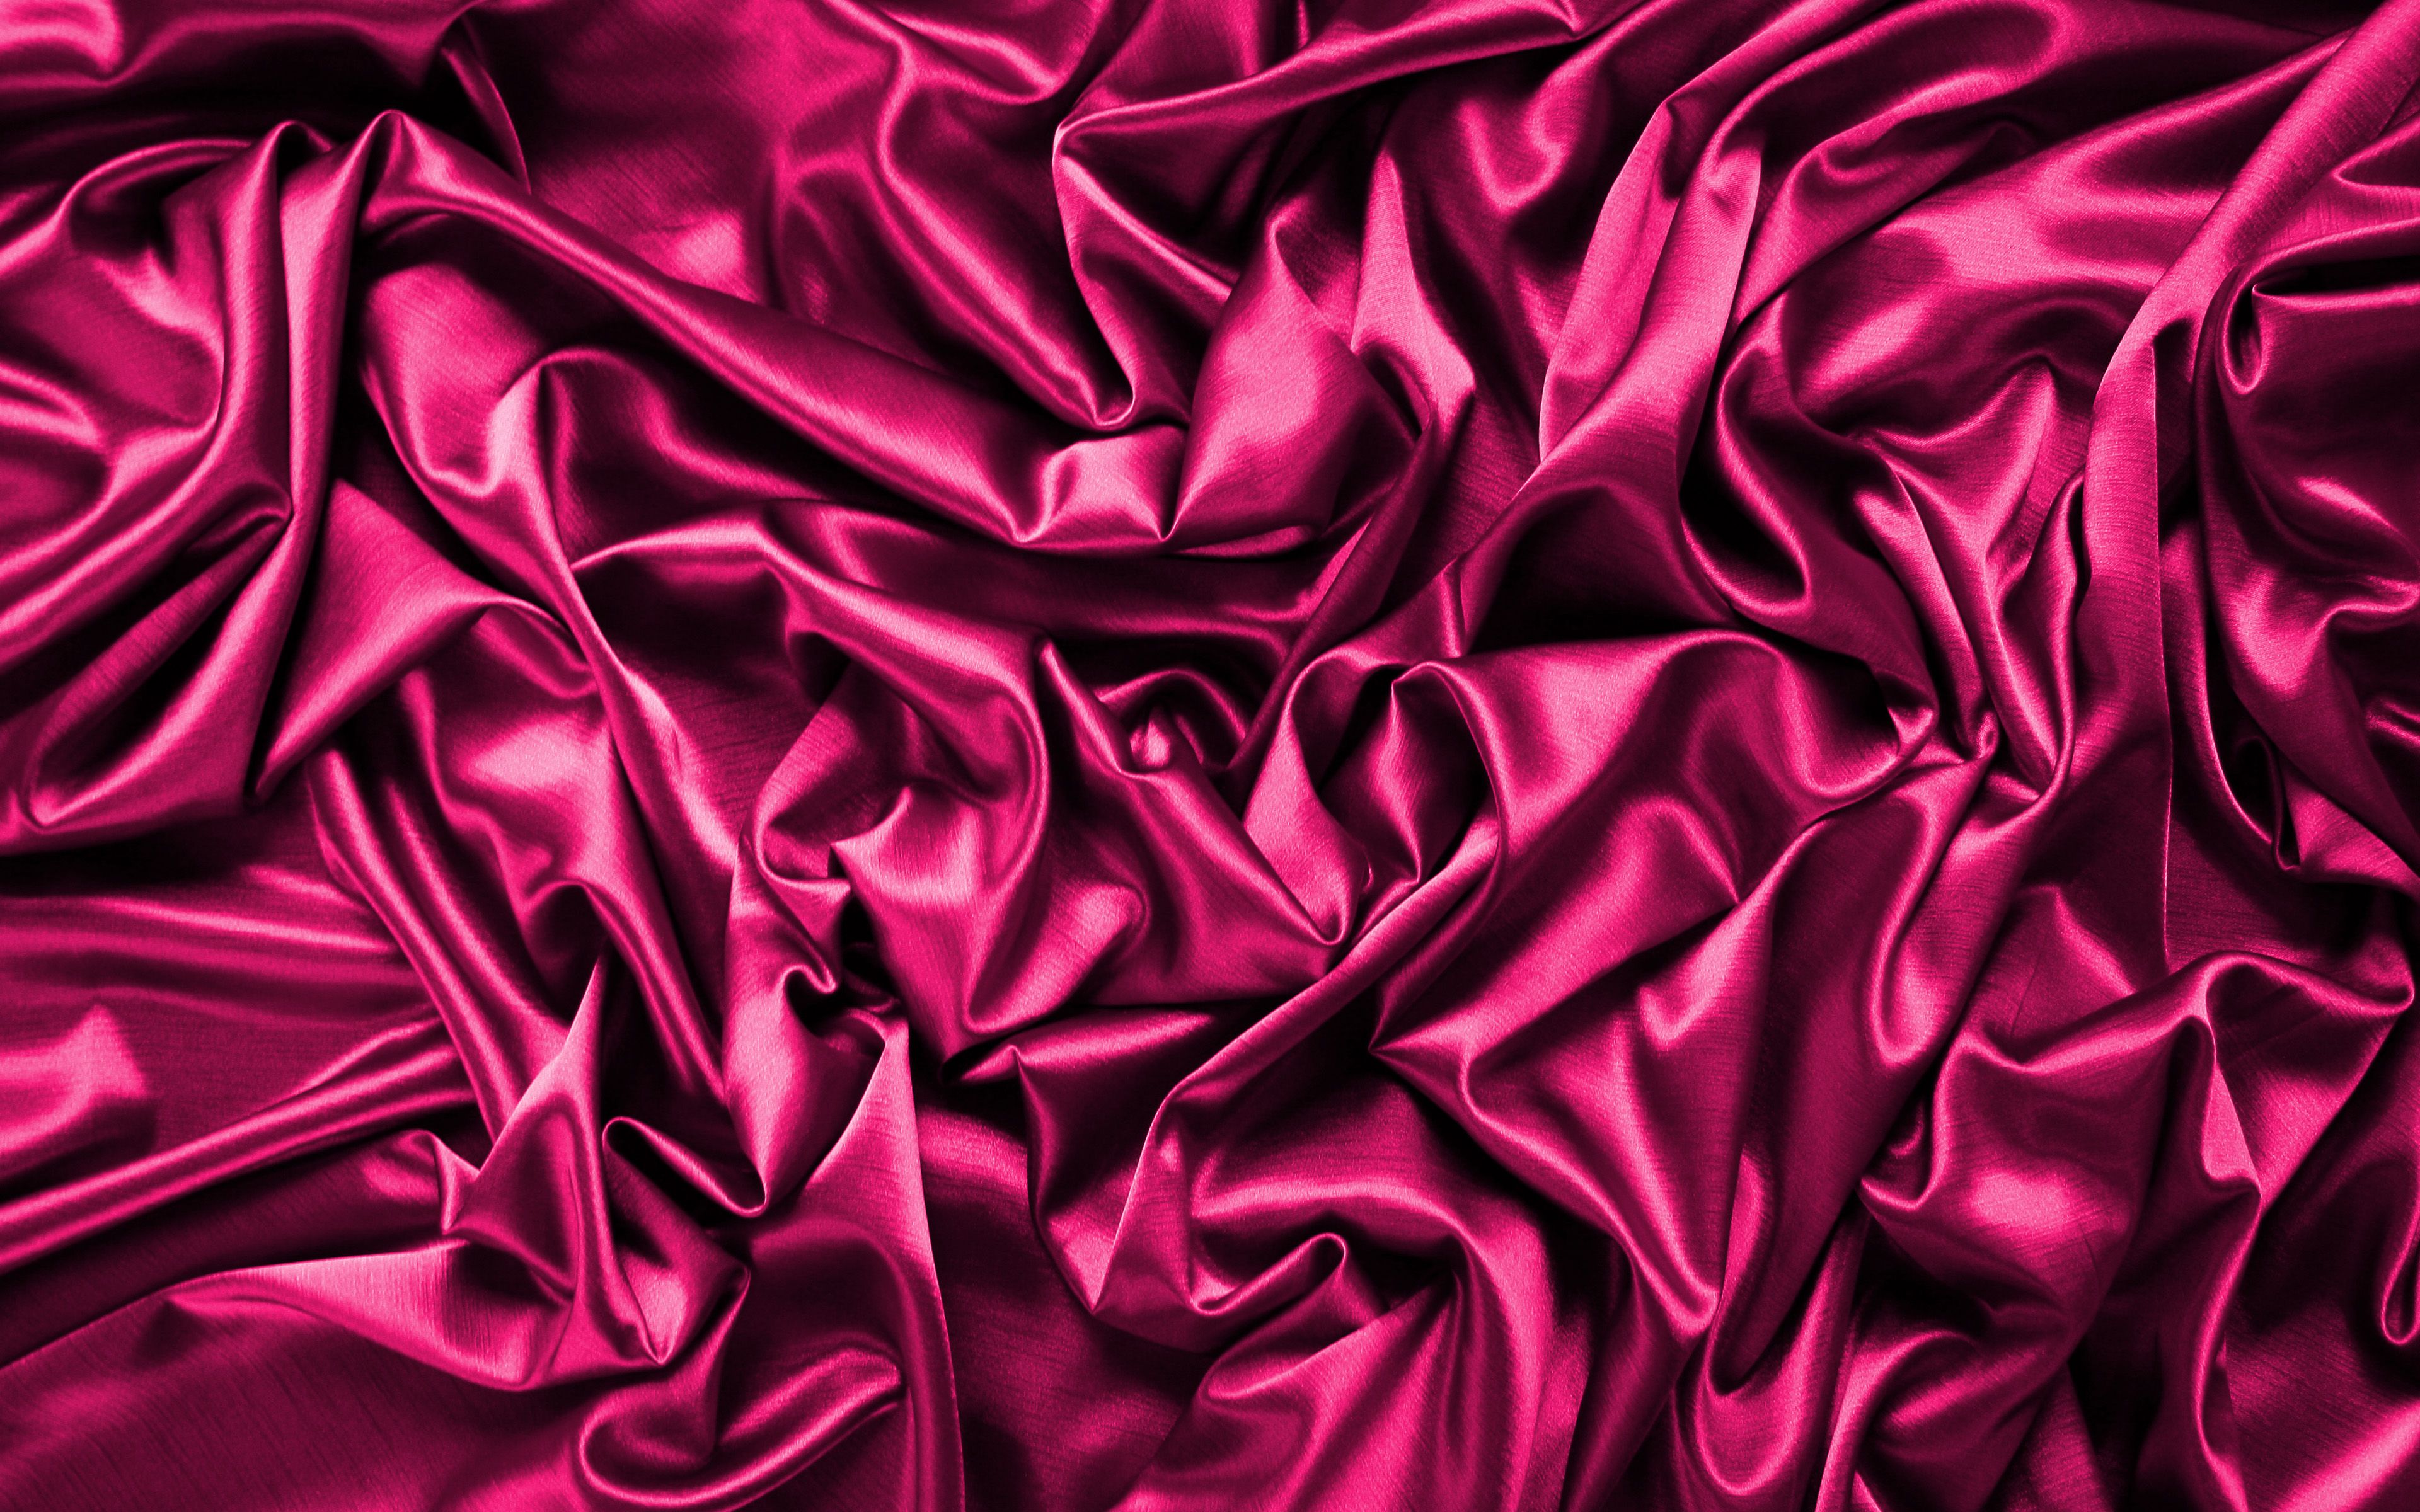 Download wallpaper pink satin background, 4k, silk textures, satin wavy background, pink background, satin textures, satin background, pink silk texture for desktop with resolution 3840x2400. High Quality HD picture wallpaper